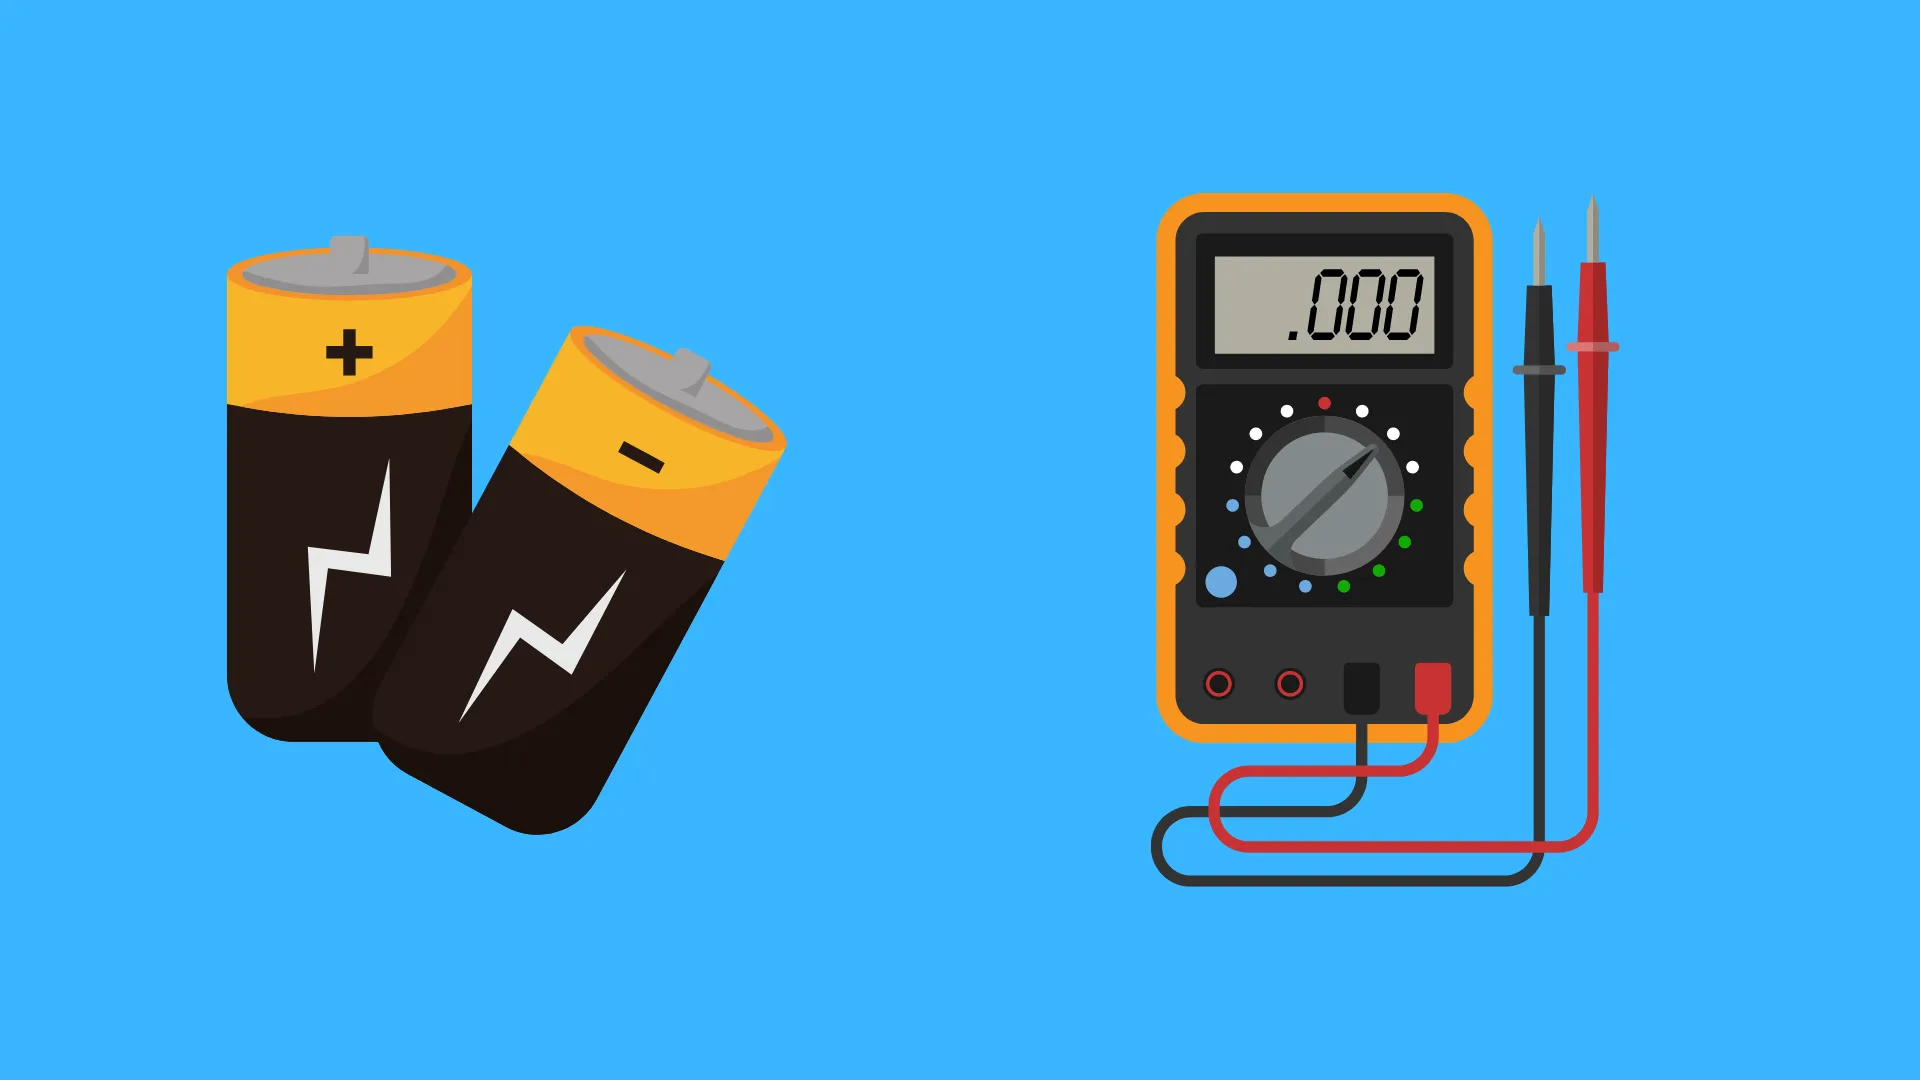 How To Test C Batteries With a Multimeter